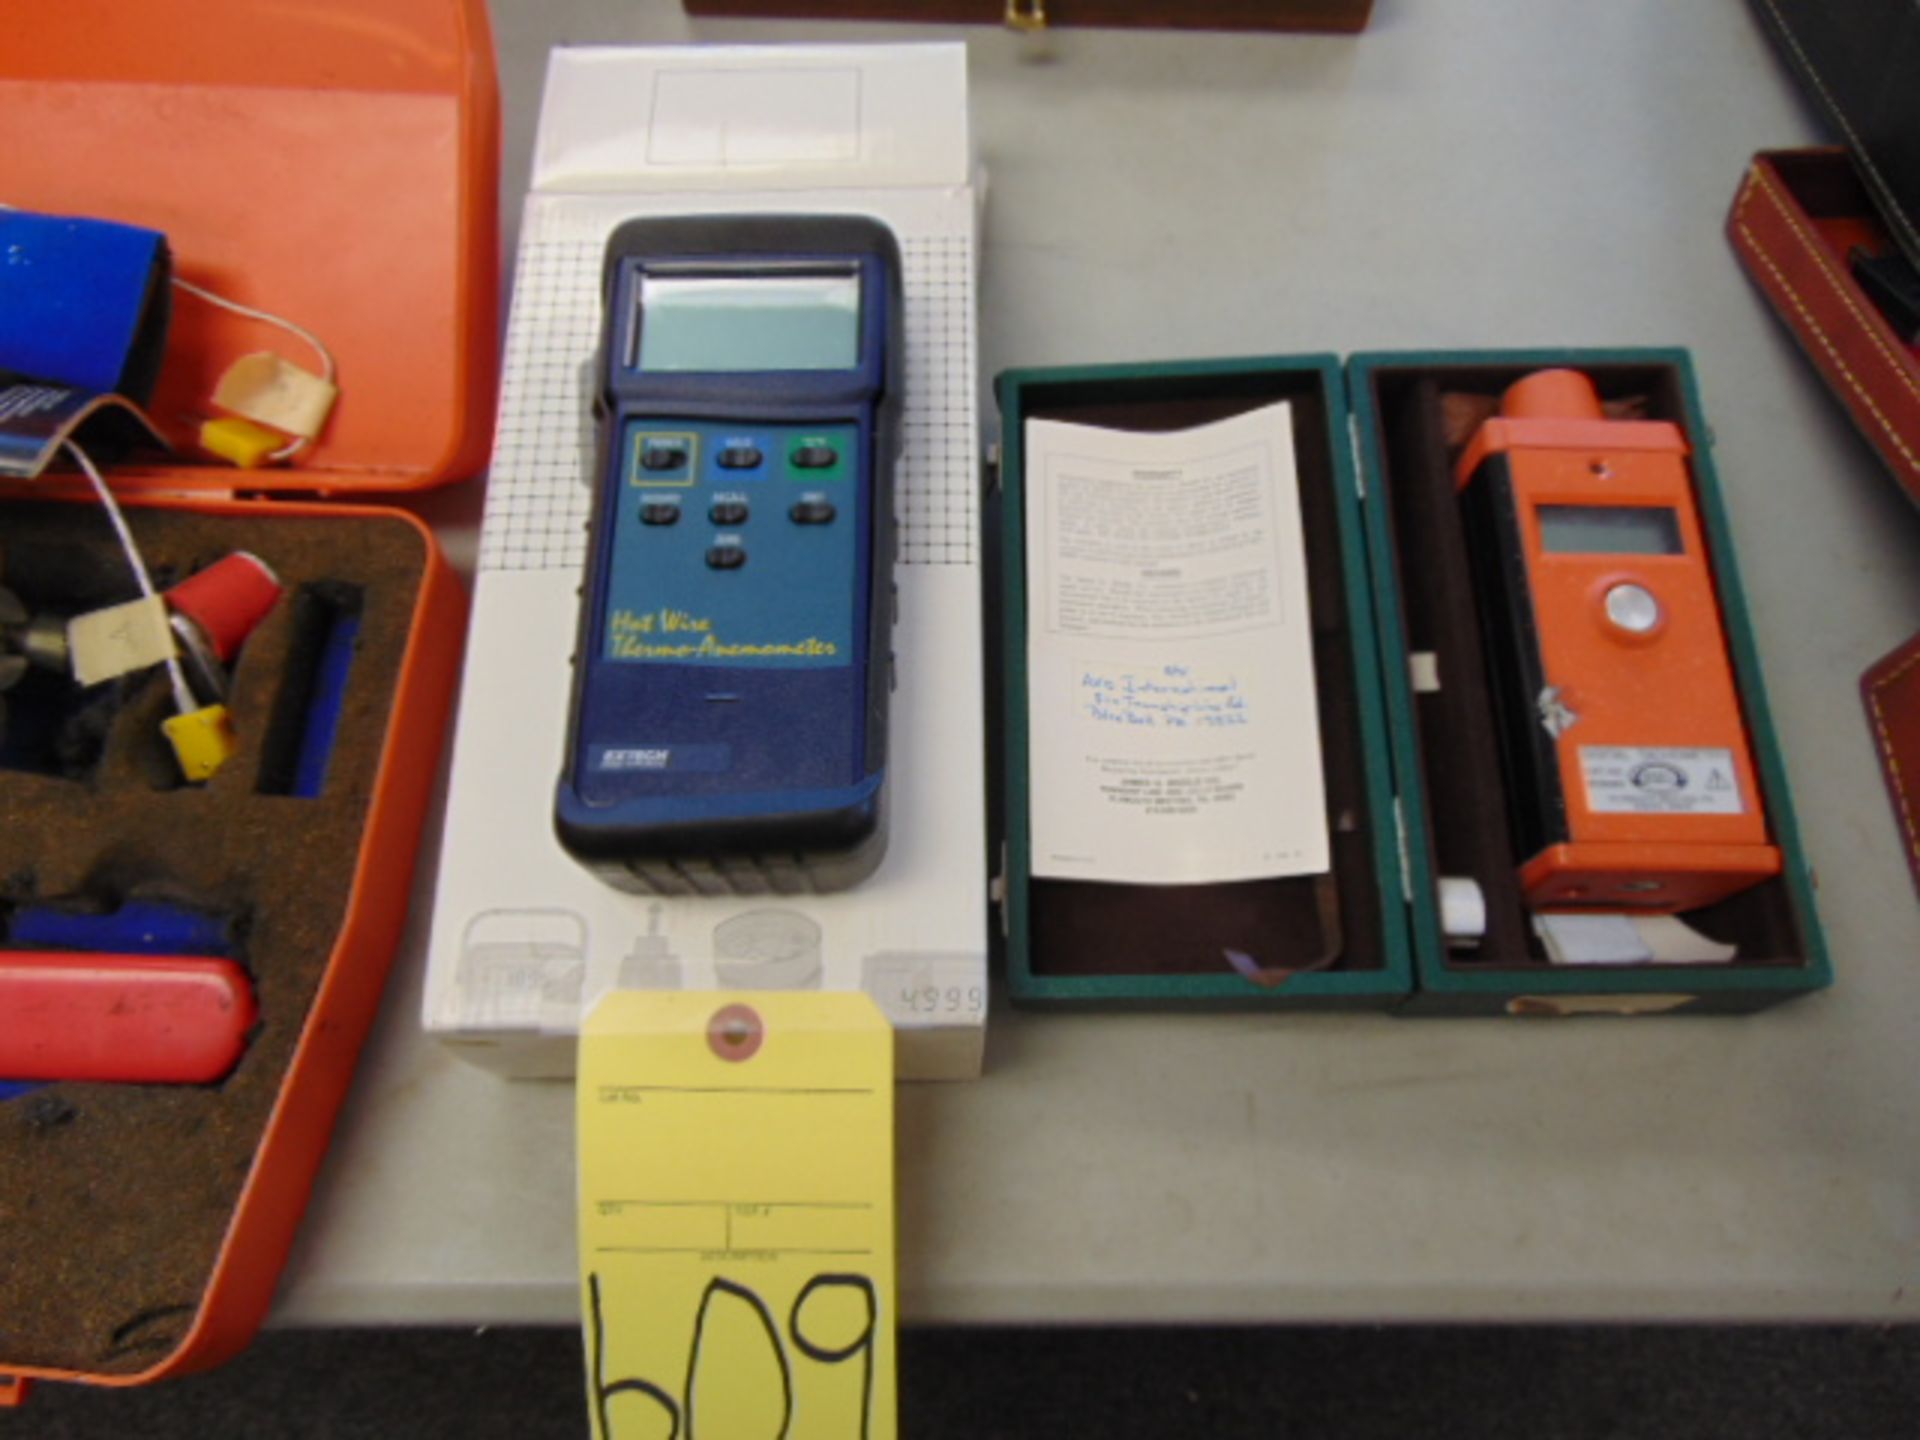 LOT CONSISTING OF: hot wire thermo-anemometer & digital tachometer